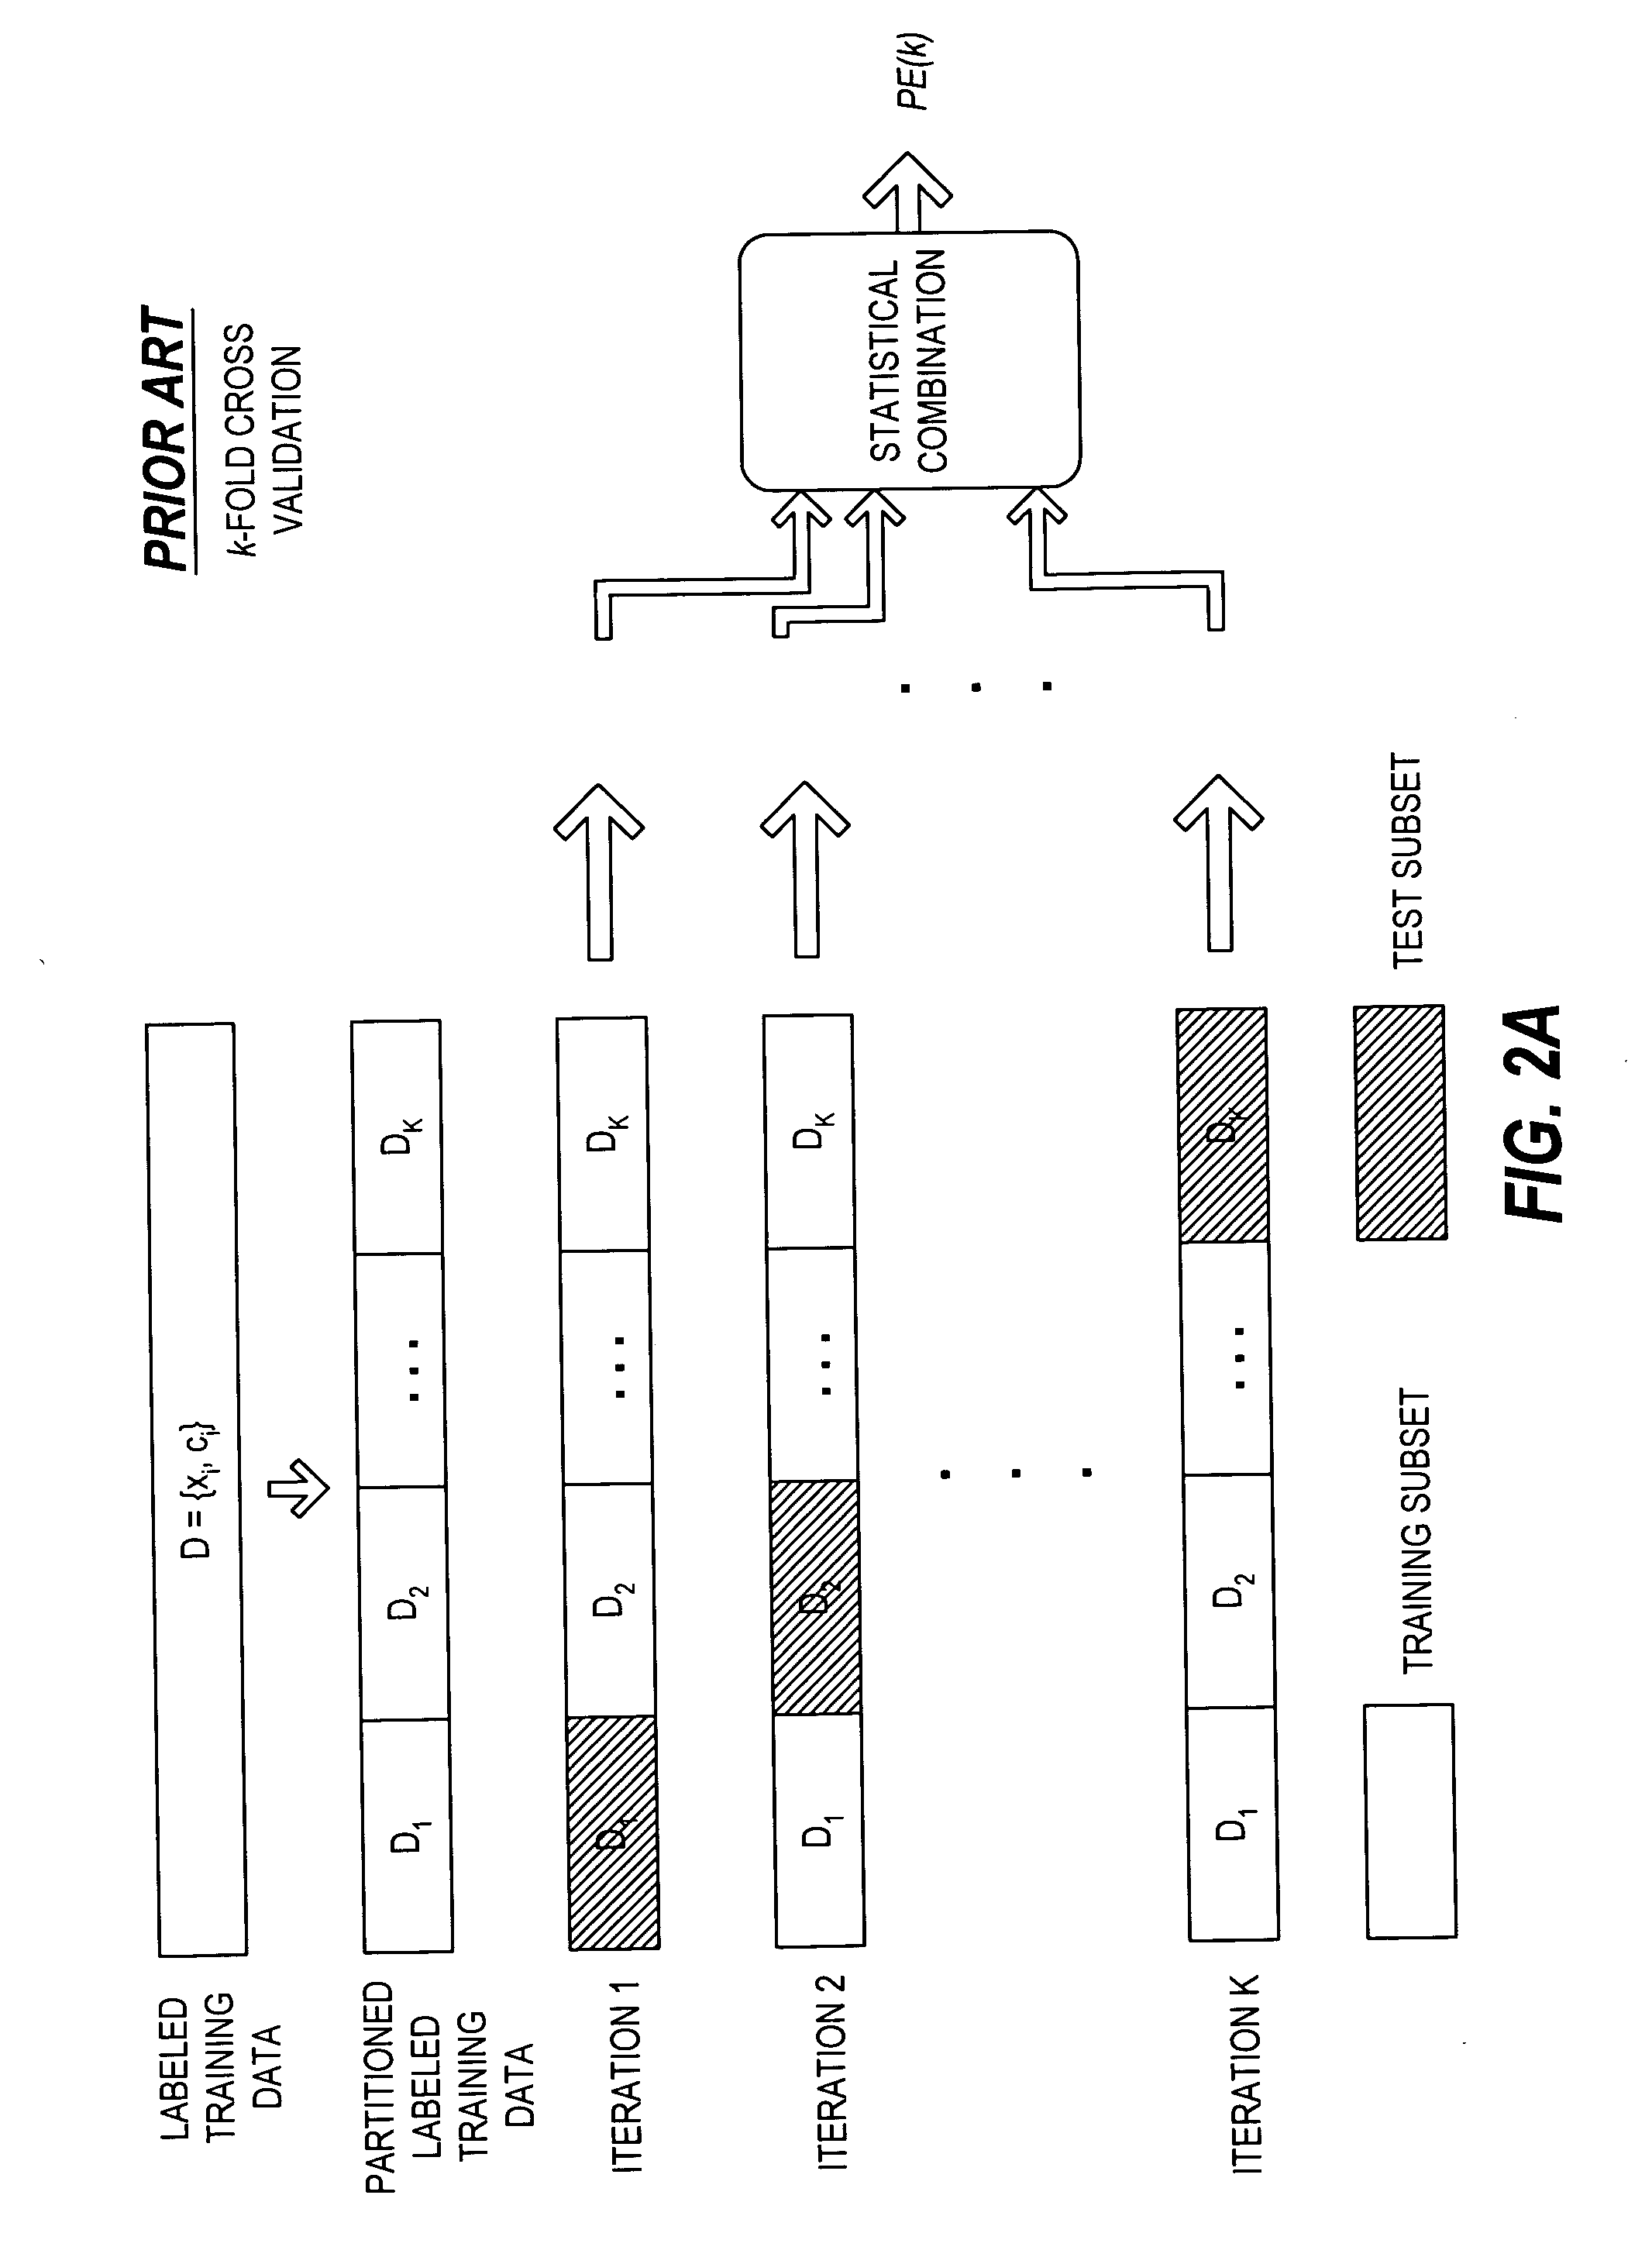 Methods and apparatus for detecting temporal process variation and for managing and predicting performance of automatic classifiers